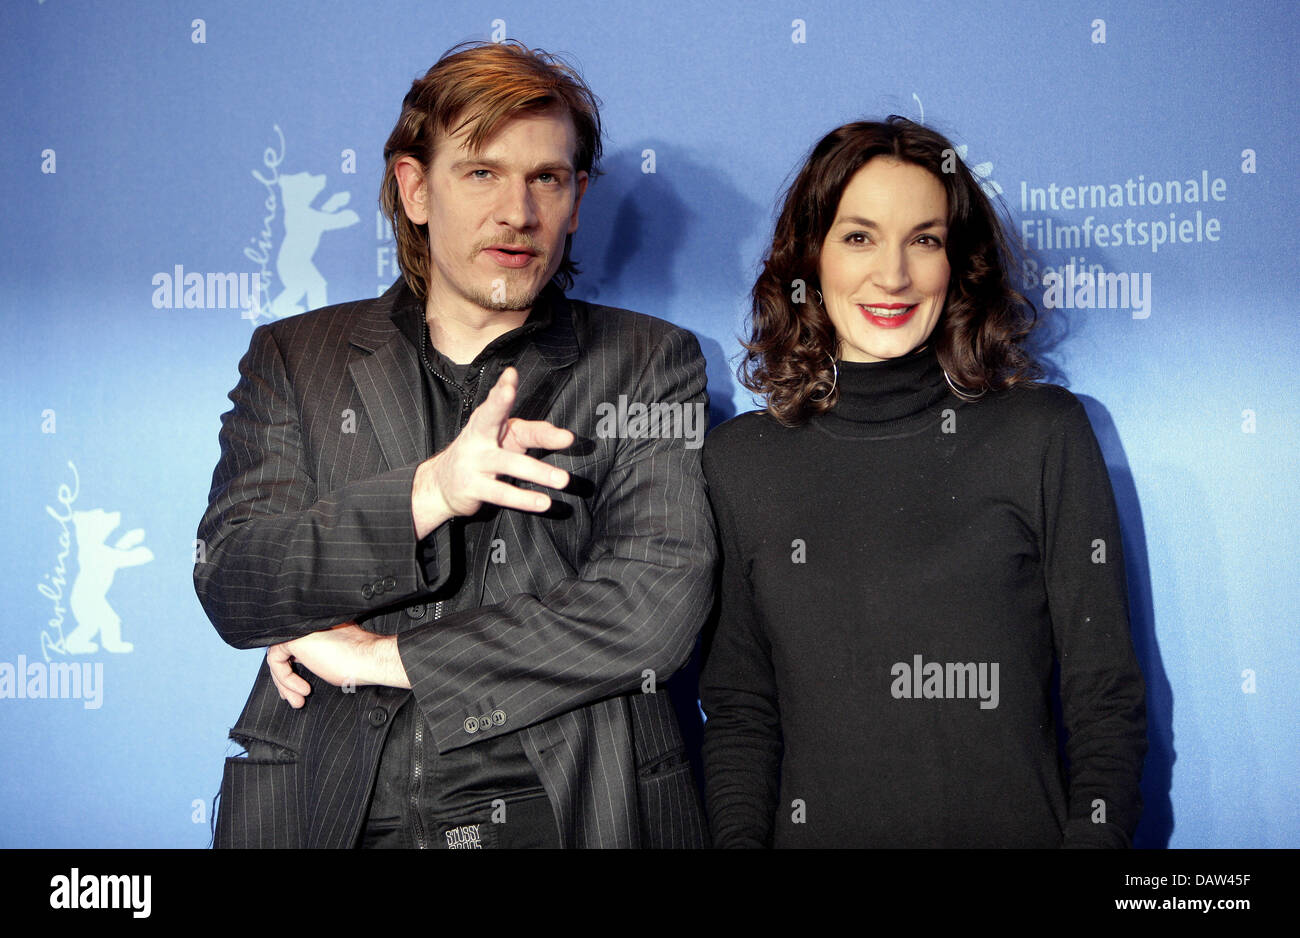 French Actror Guillaume Depardieu Gerard Depardieu S Son And His Colleague Jeanne Balibar Are Pictured At A Photo Call For The Film Ne Touchez Pas La Hache Don T Touch The Axe At The